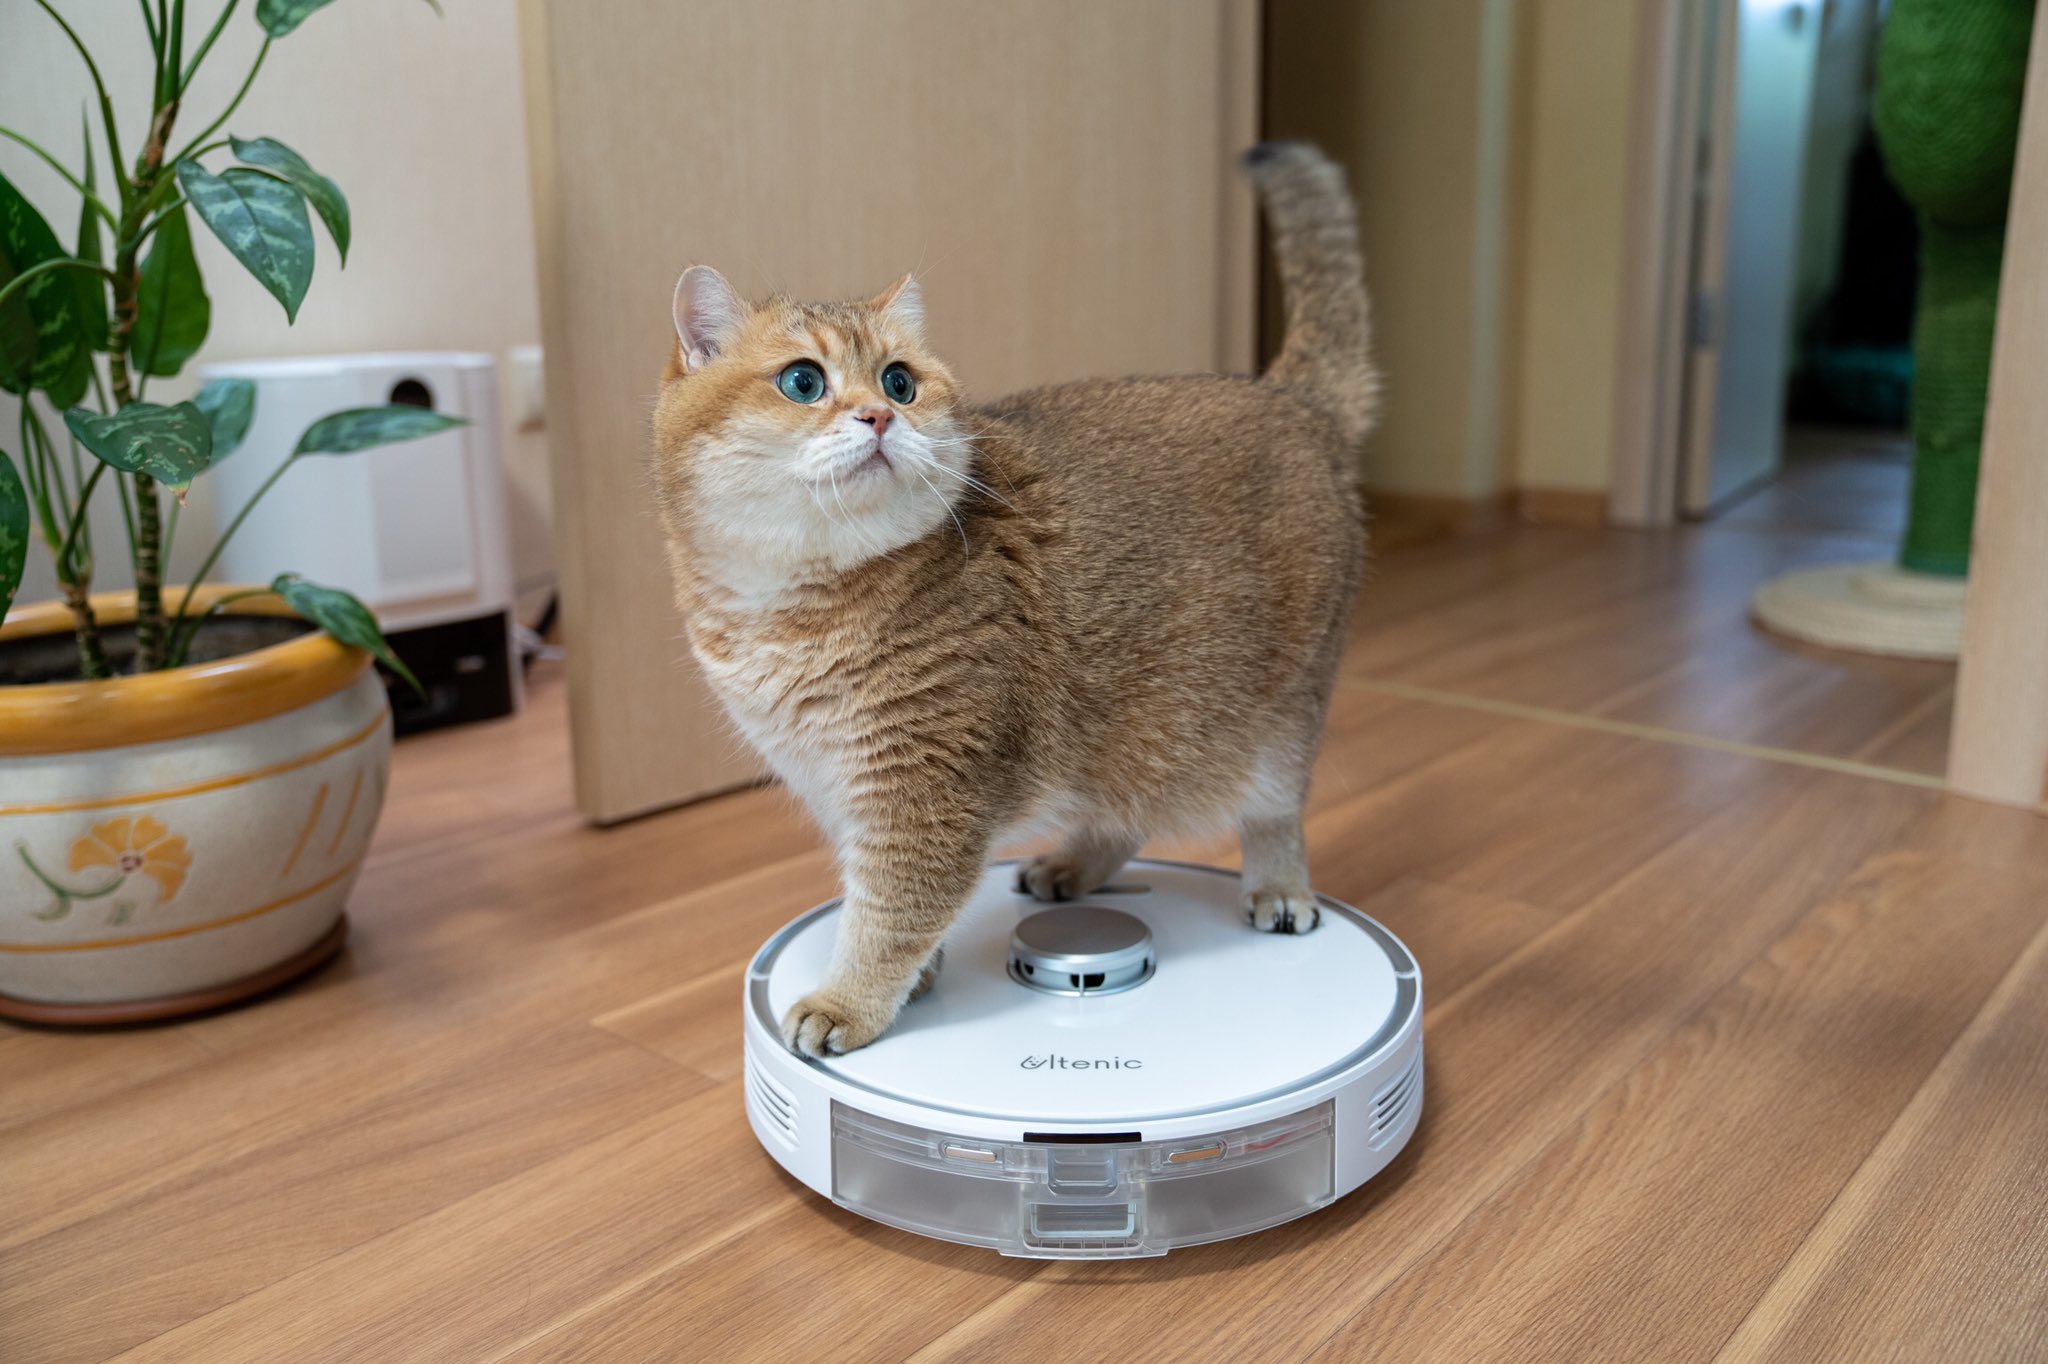 Hosico cat on Twitter: "I ride a robot vacuum cleaner! 😹 / Twitter